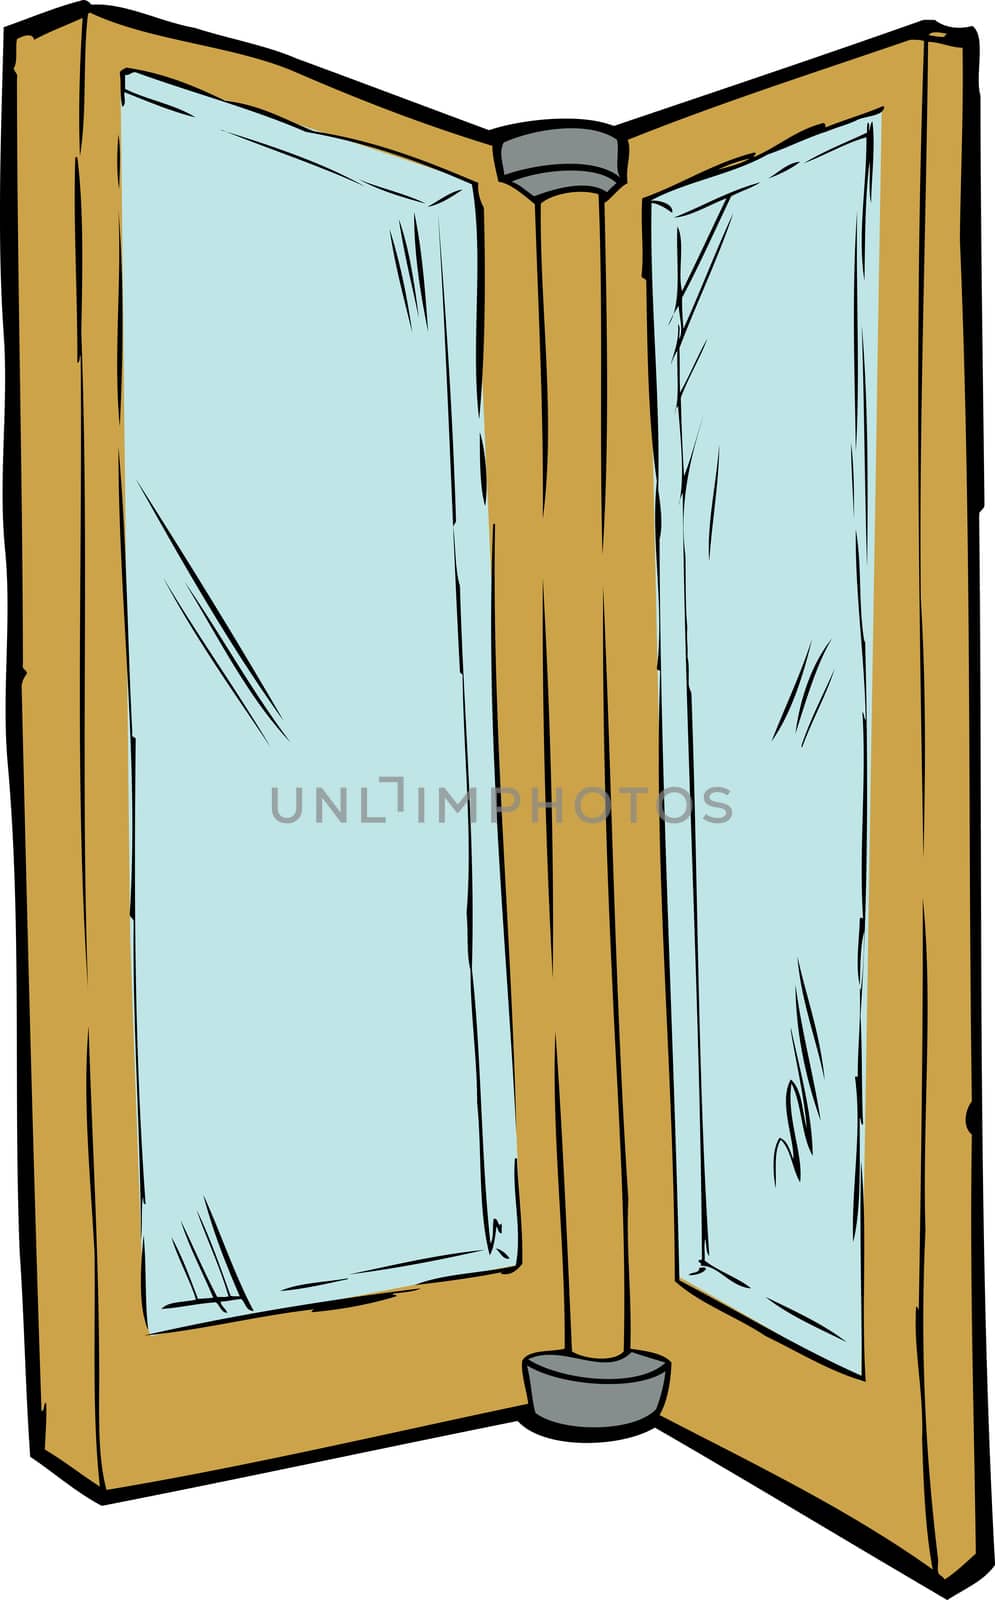 Isolated revolving door panes over white background